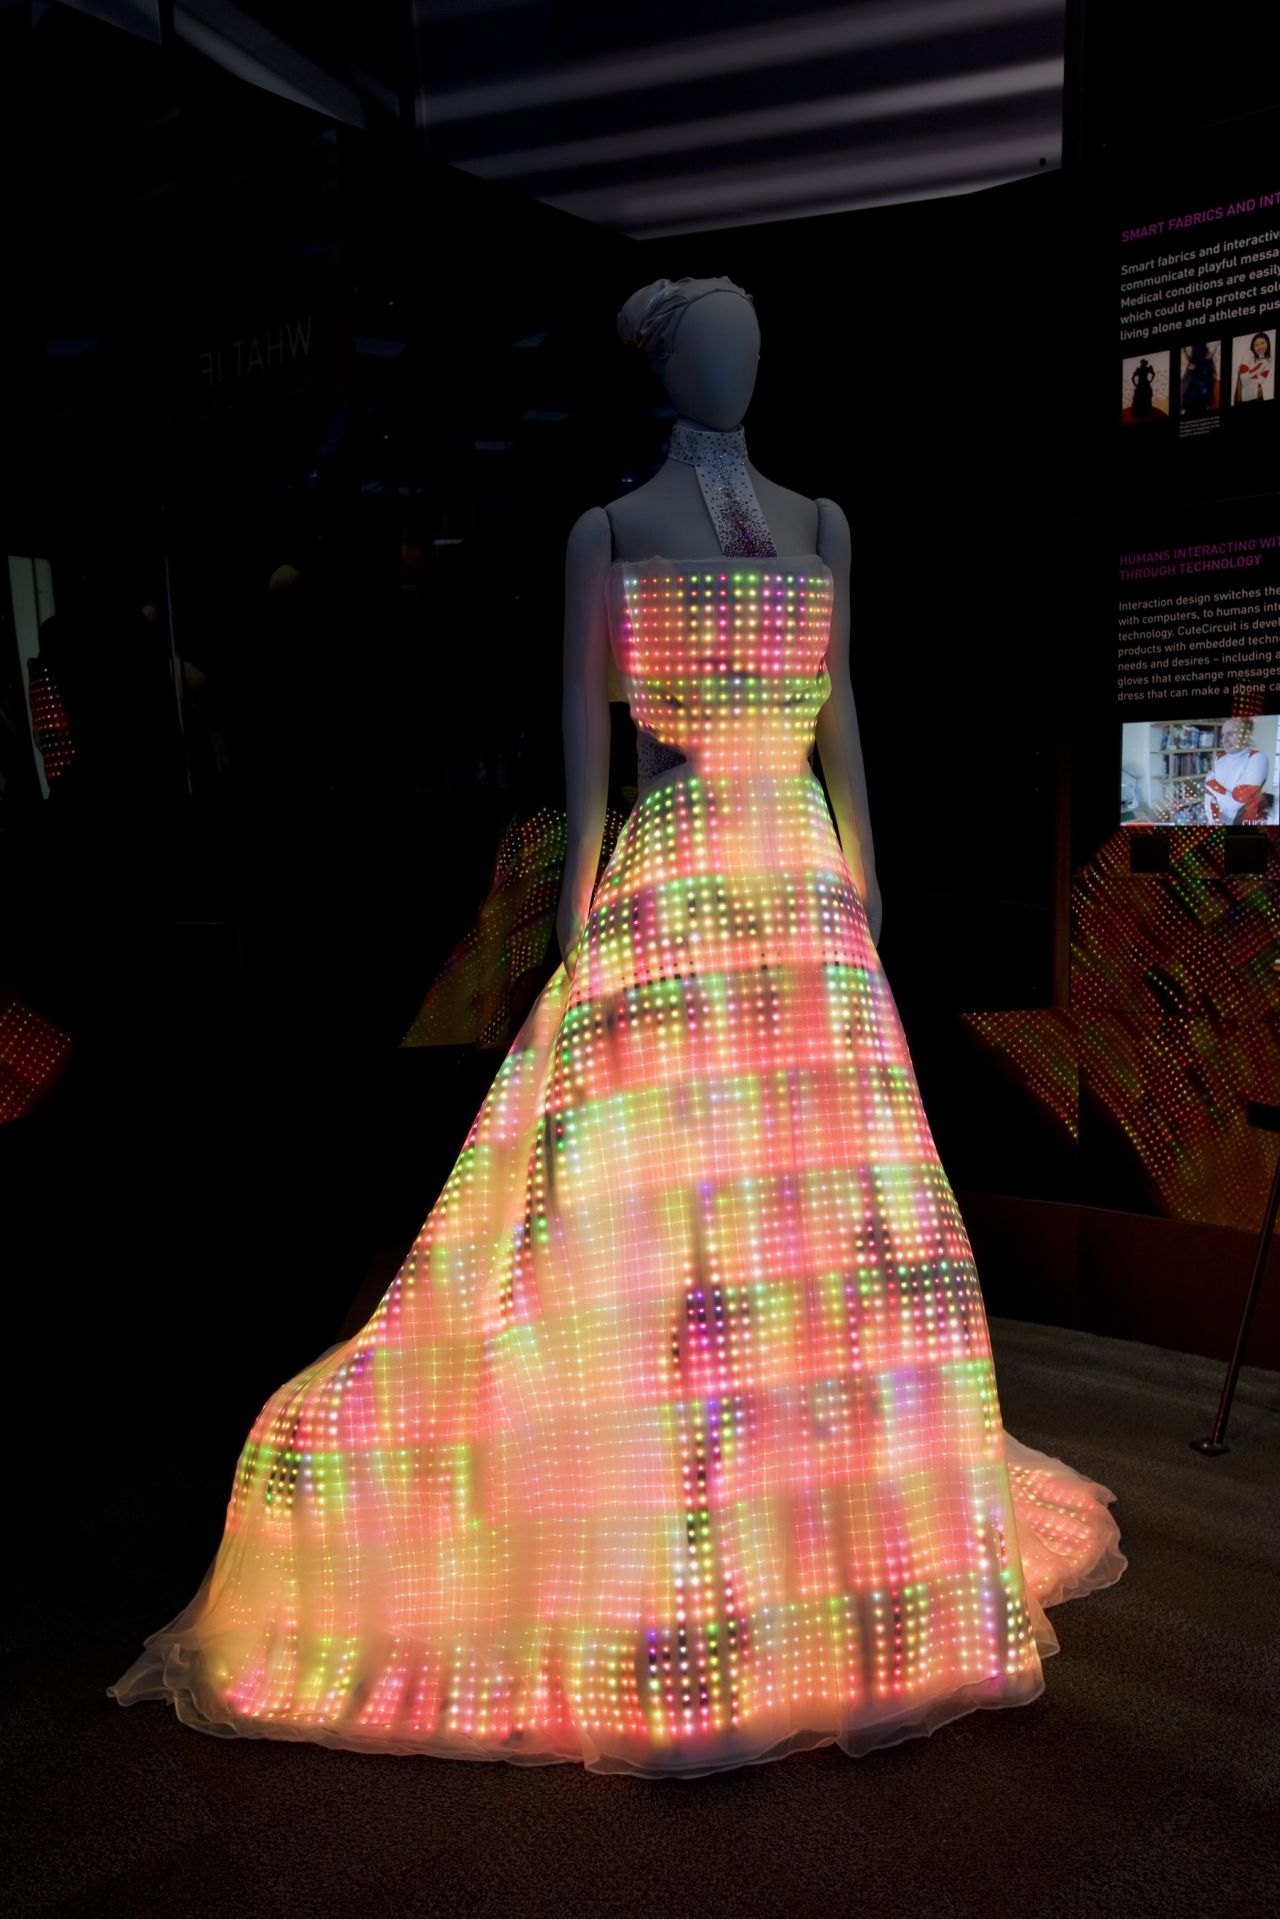 Shine bright like a diamond ... or be the star at futuristic rave parties. The <a href="http://cutecircuit.com/portfolio/galaxy-dress/" target="_blank" target="_blank">GalaxyDress by CuteCircuit</a> is embroidered with 24,000 full color LEDs, and is believed to be the largest wearable display in the world. The LEDs are extra-thin, flexible and hand embroidered on a layer of silk. Fabulous darling!